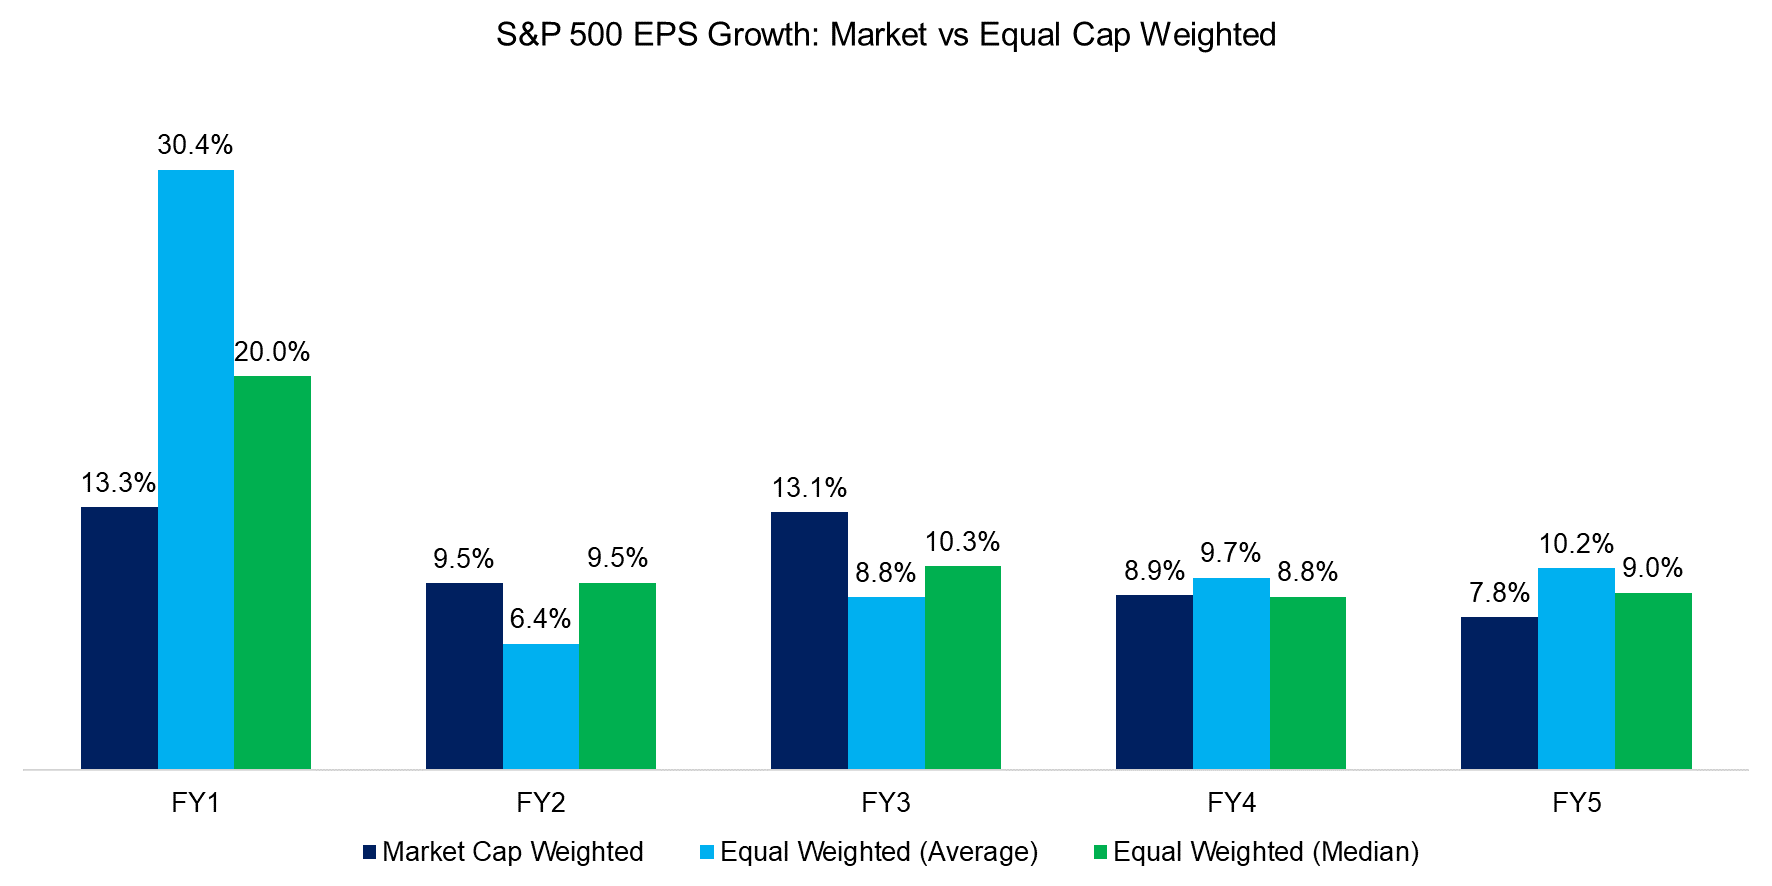 S&P 500 EPS Growth Market vs Equal Cap Weighted